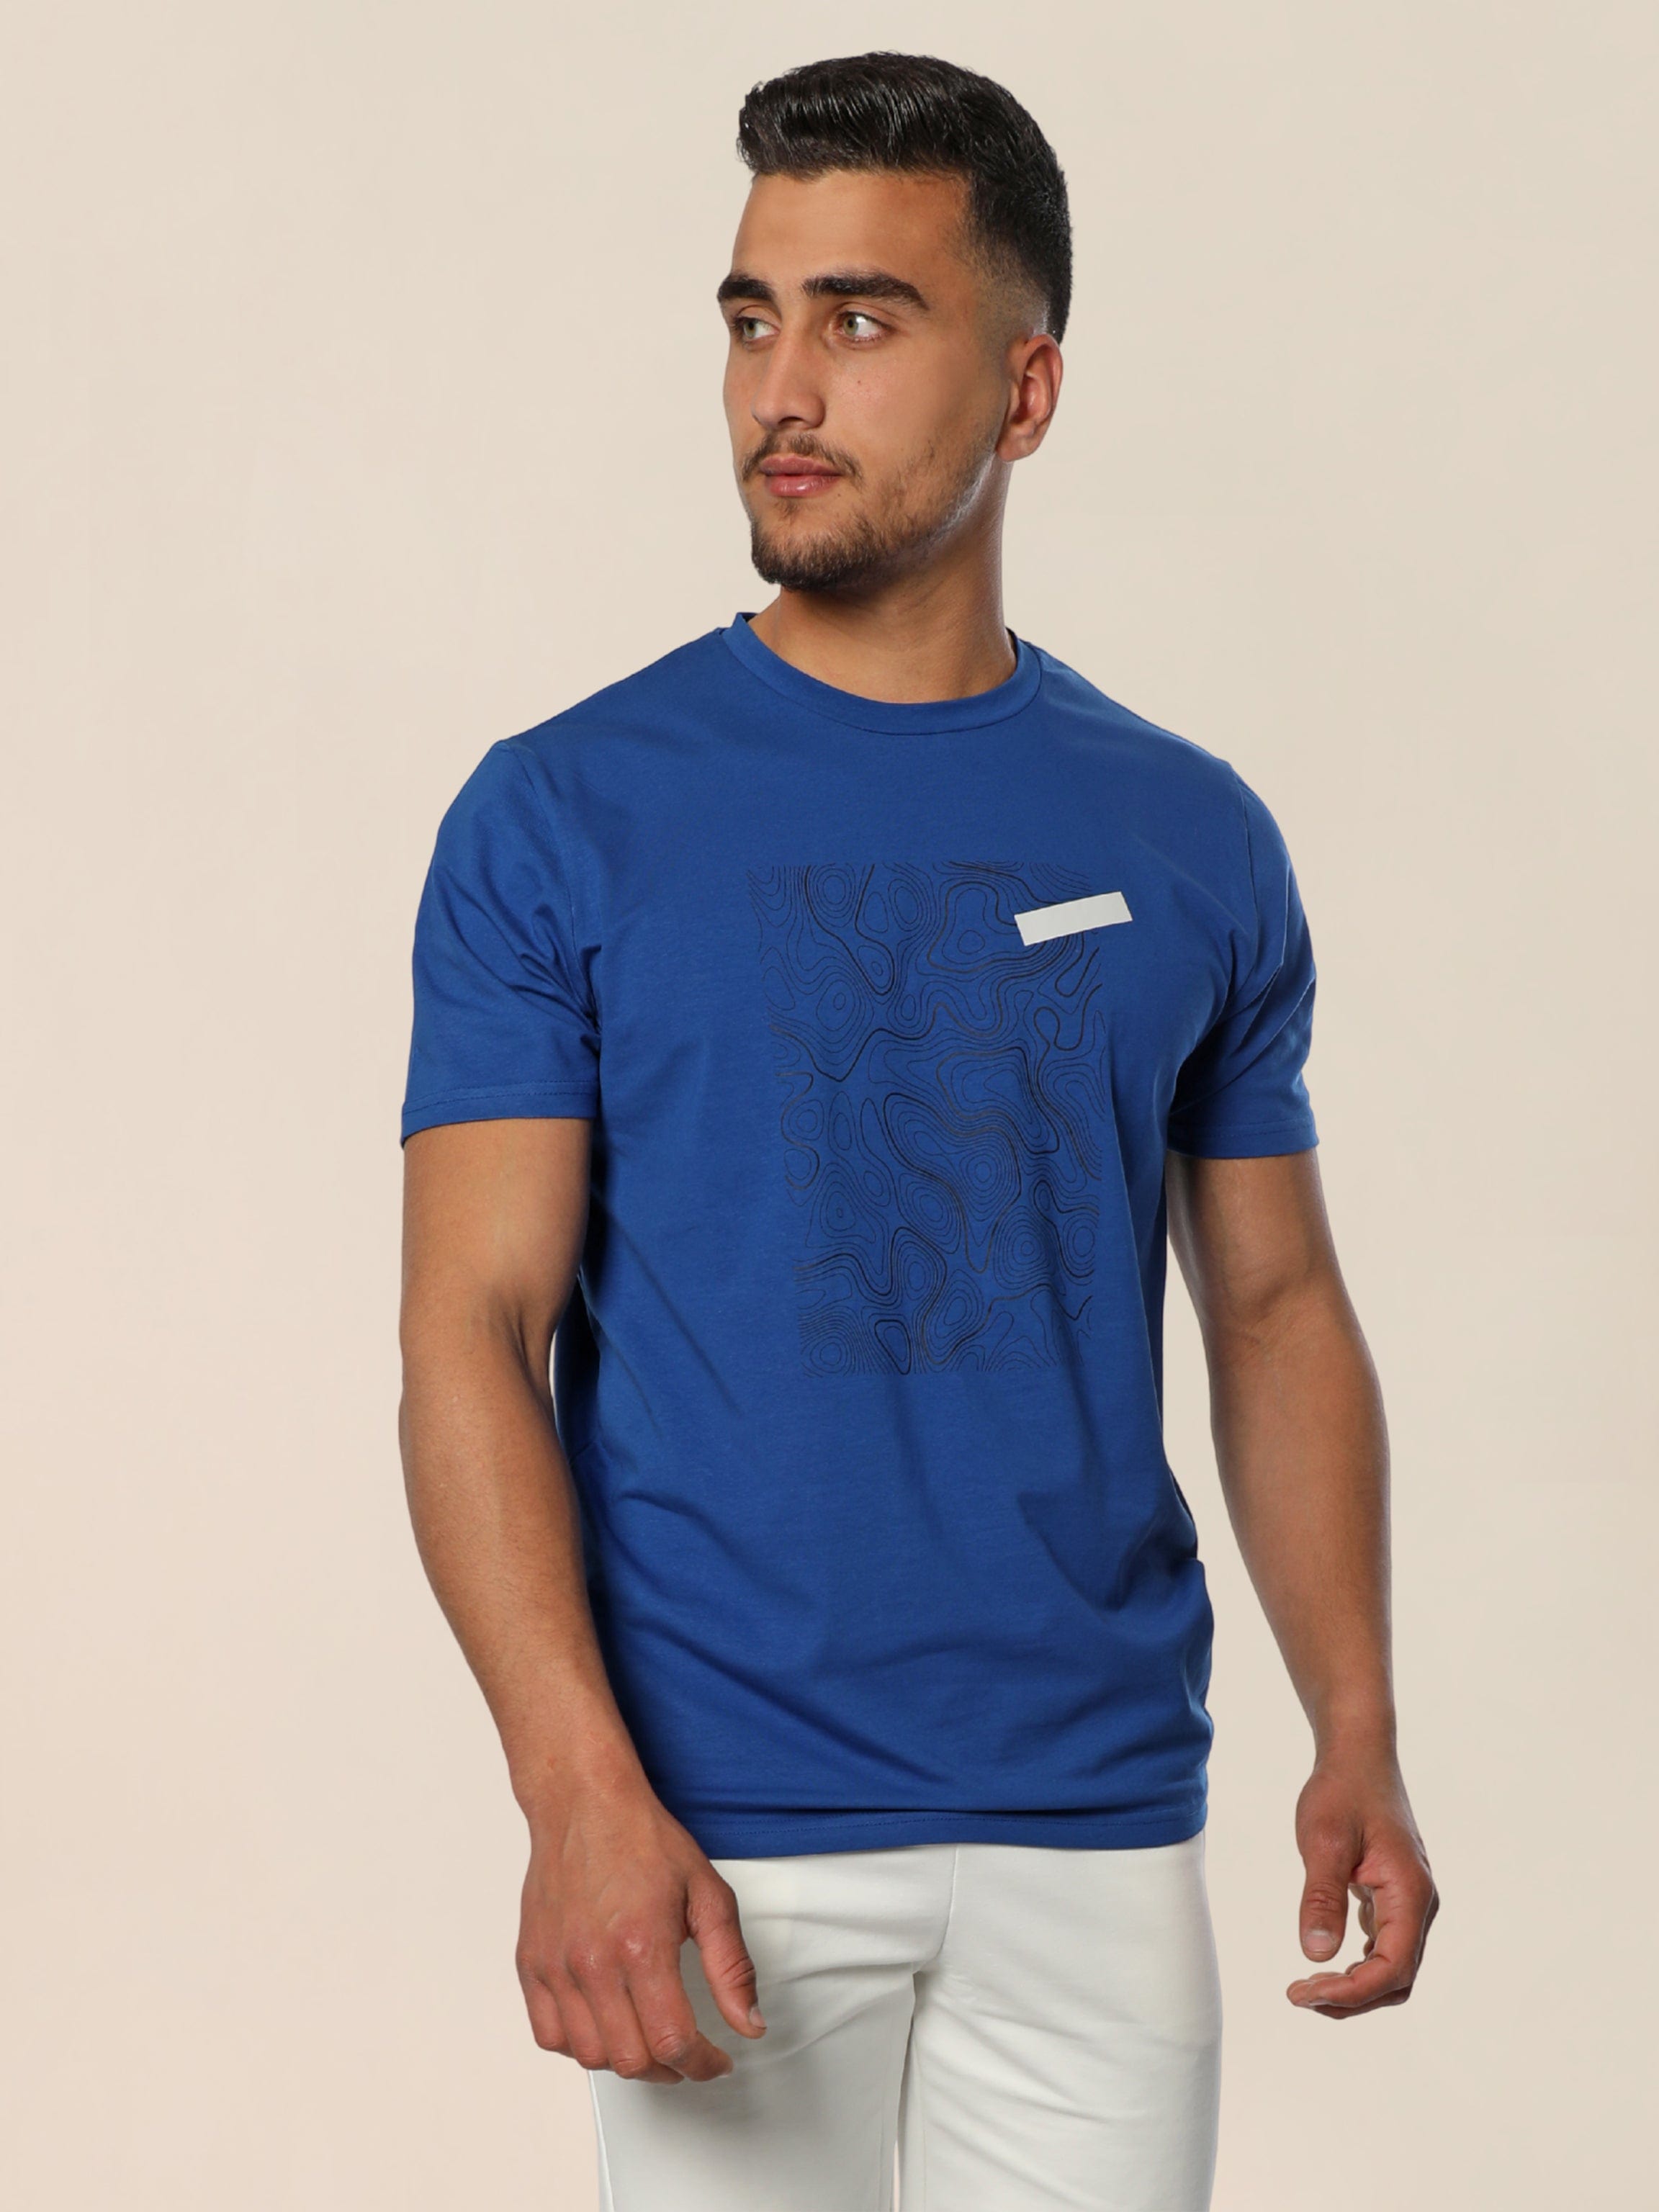 Men Short-Sleeves T-shirt With Unique Front Printed Design